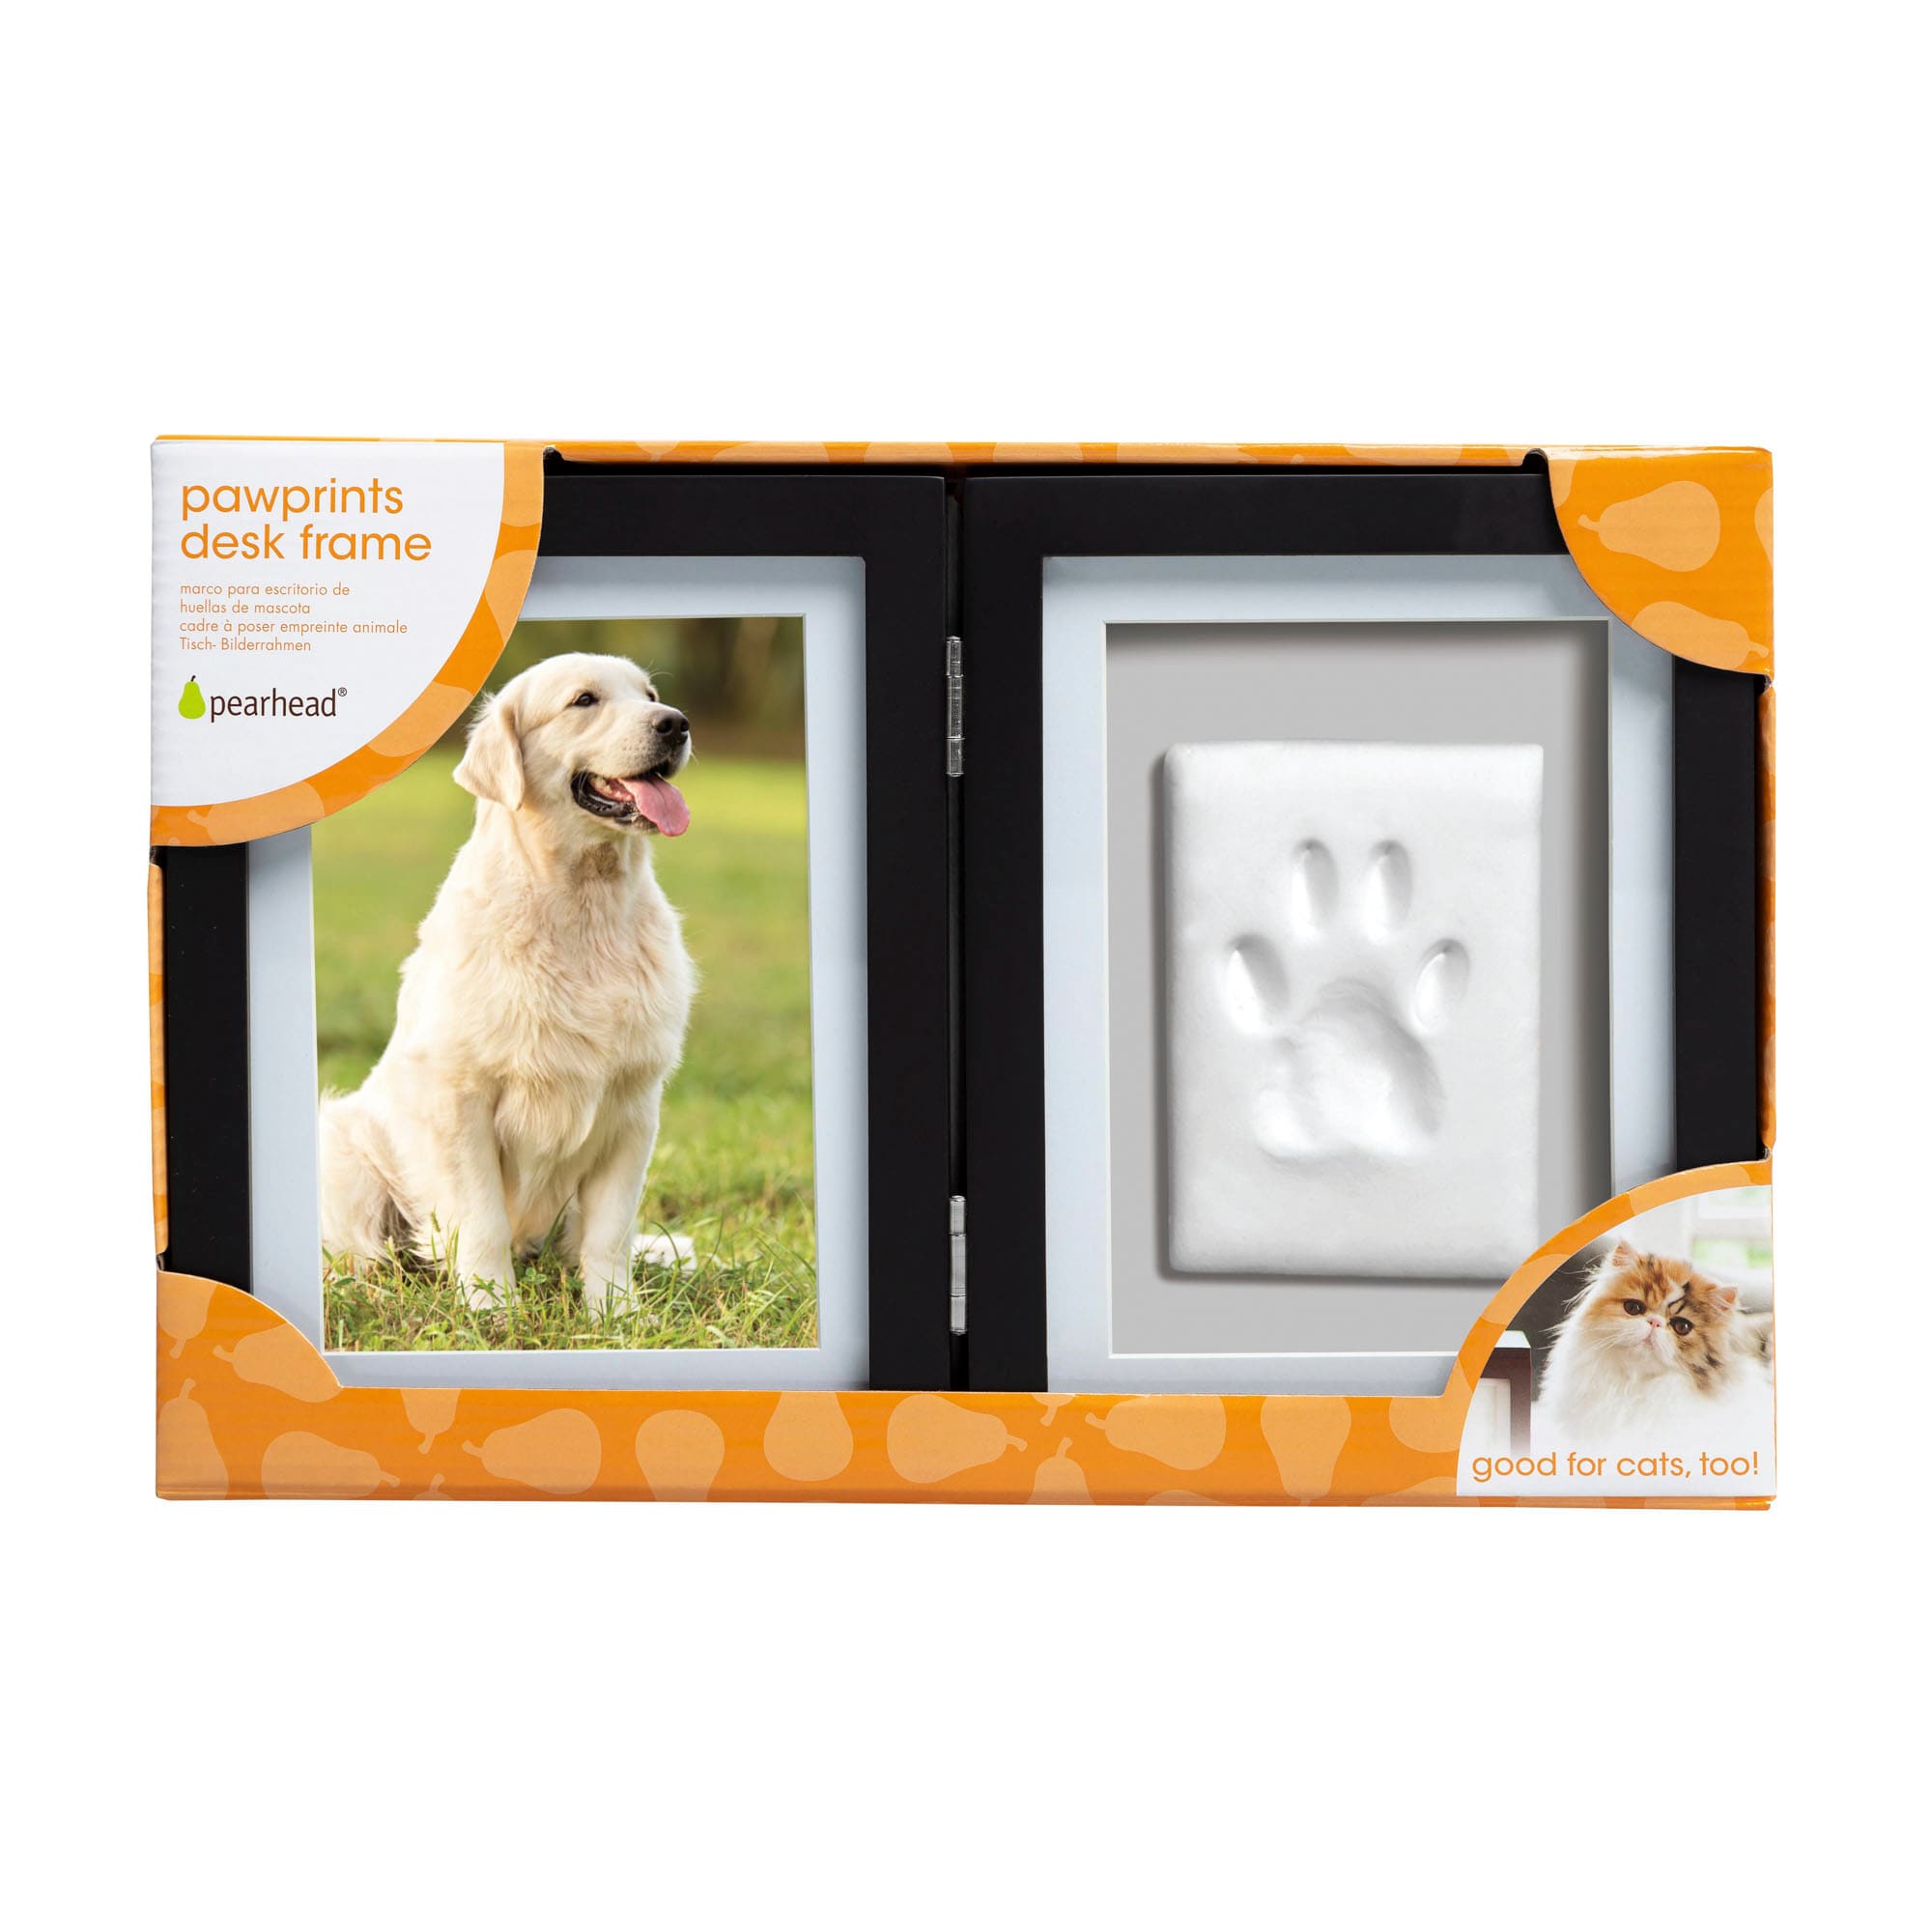 Keepsake Gift for Pet Lover Pearhead Dog Or Cat Paw Prints Pet Wall Frame and Paw Print Kit Perfect for Any Dog Owner or Cat Owner 